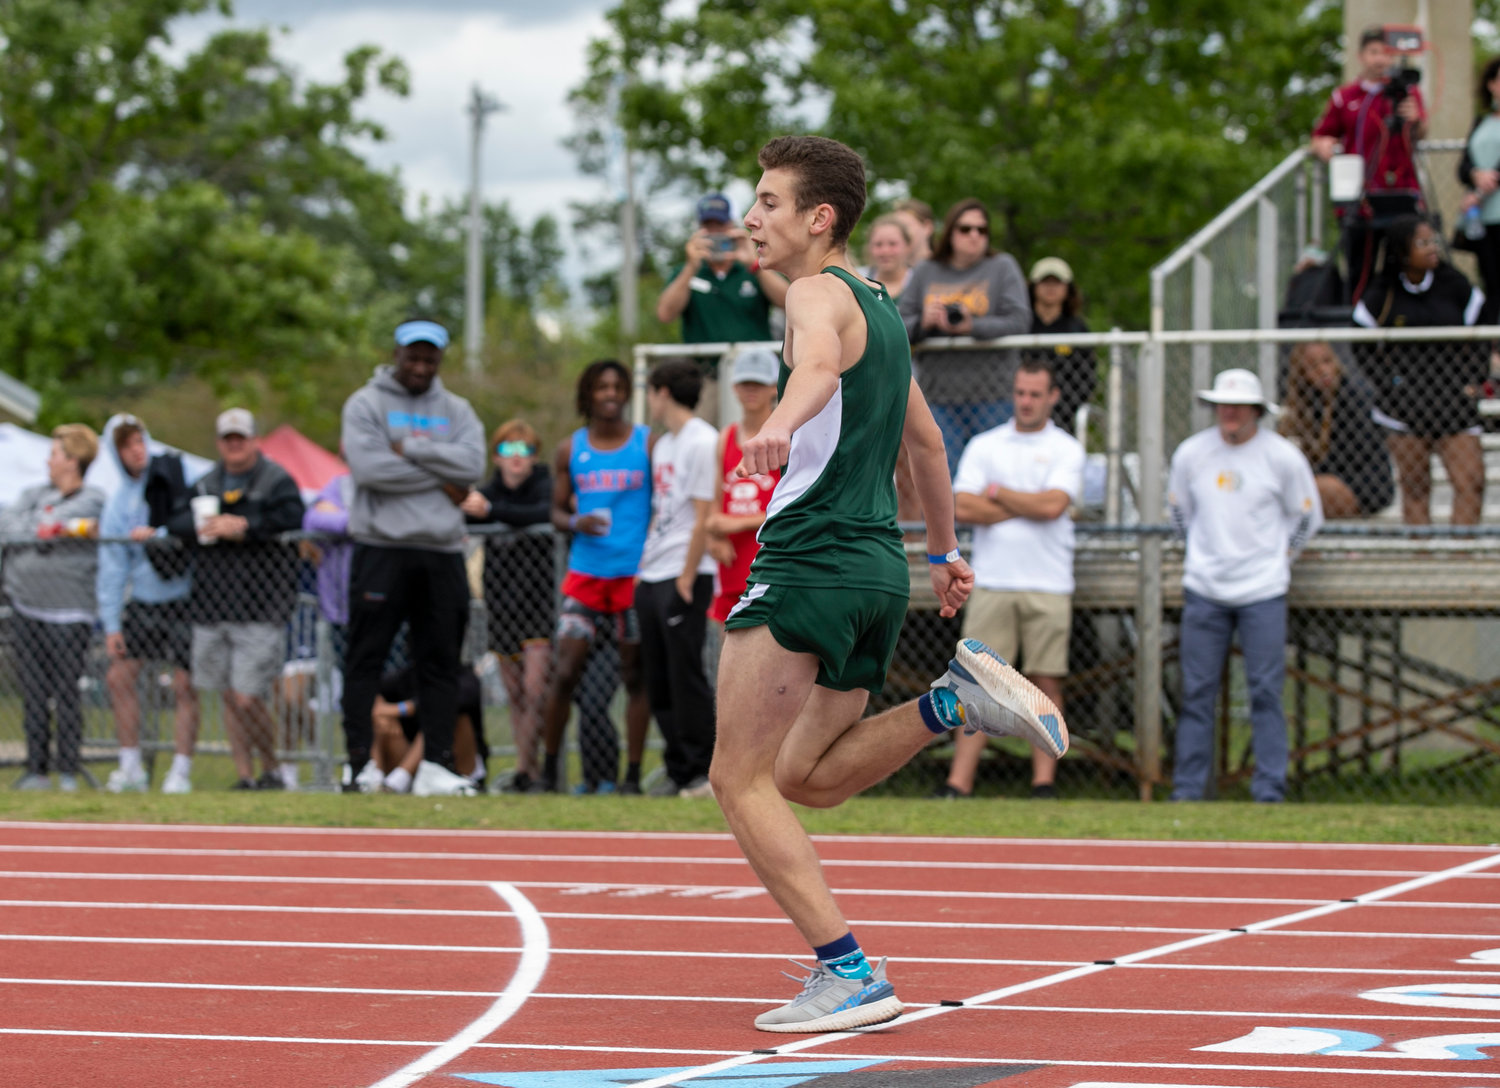 Snook Christian Academy junior Anton Mazur hits the finish line in first place of his section of the 400-meter dash on the first day of competition at the Alabama Independent School Association’s state track and field championships in Gulf Shores Thursday afternoon.